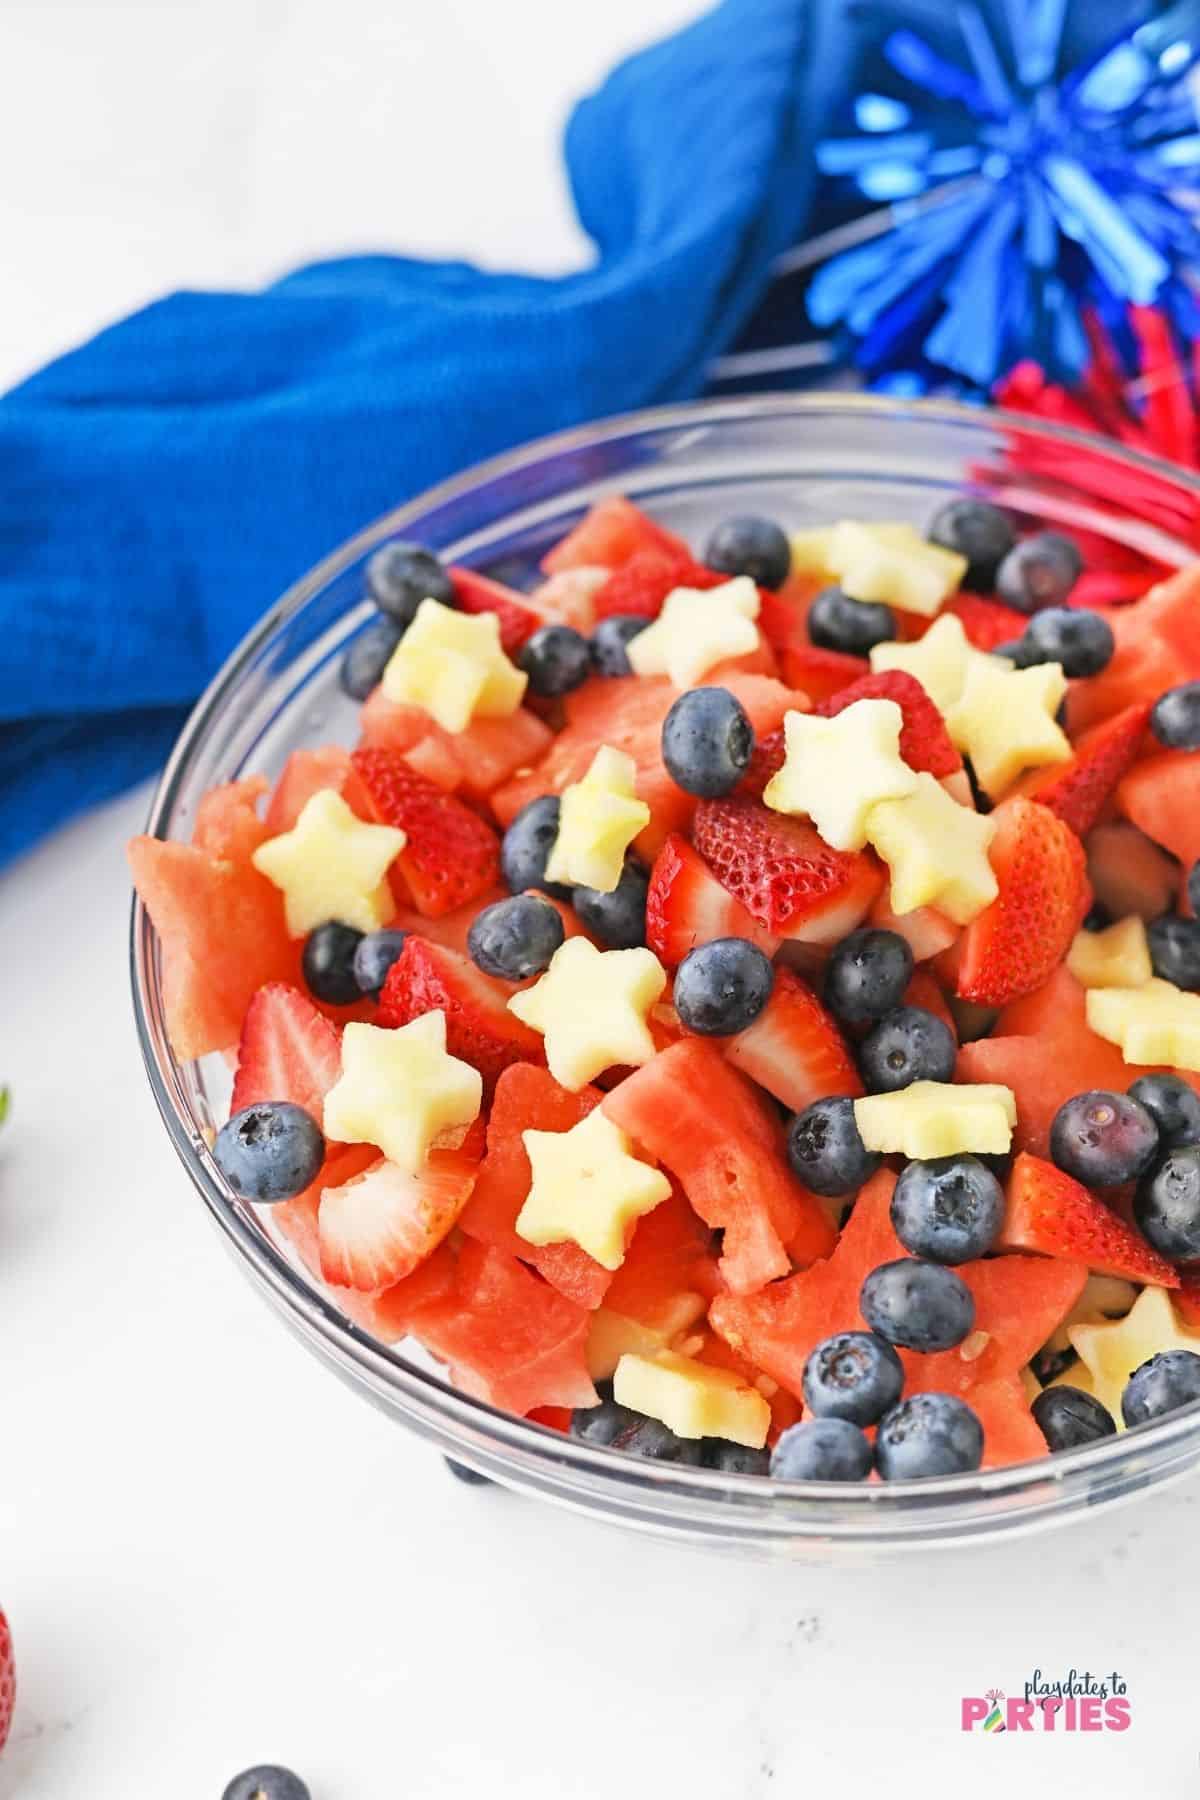 Layers of watermelon stars, apple stars, blueberries, and strawberries make a perfectly patriotic side dish.